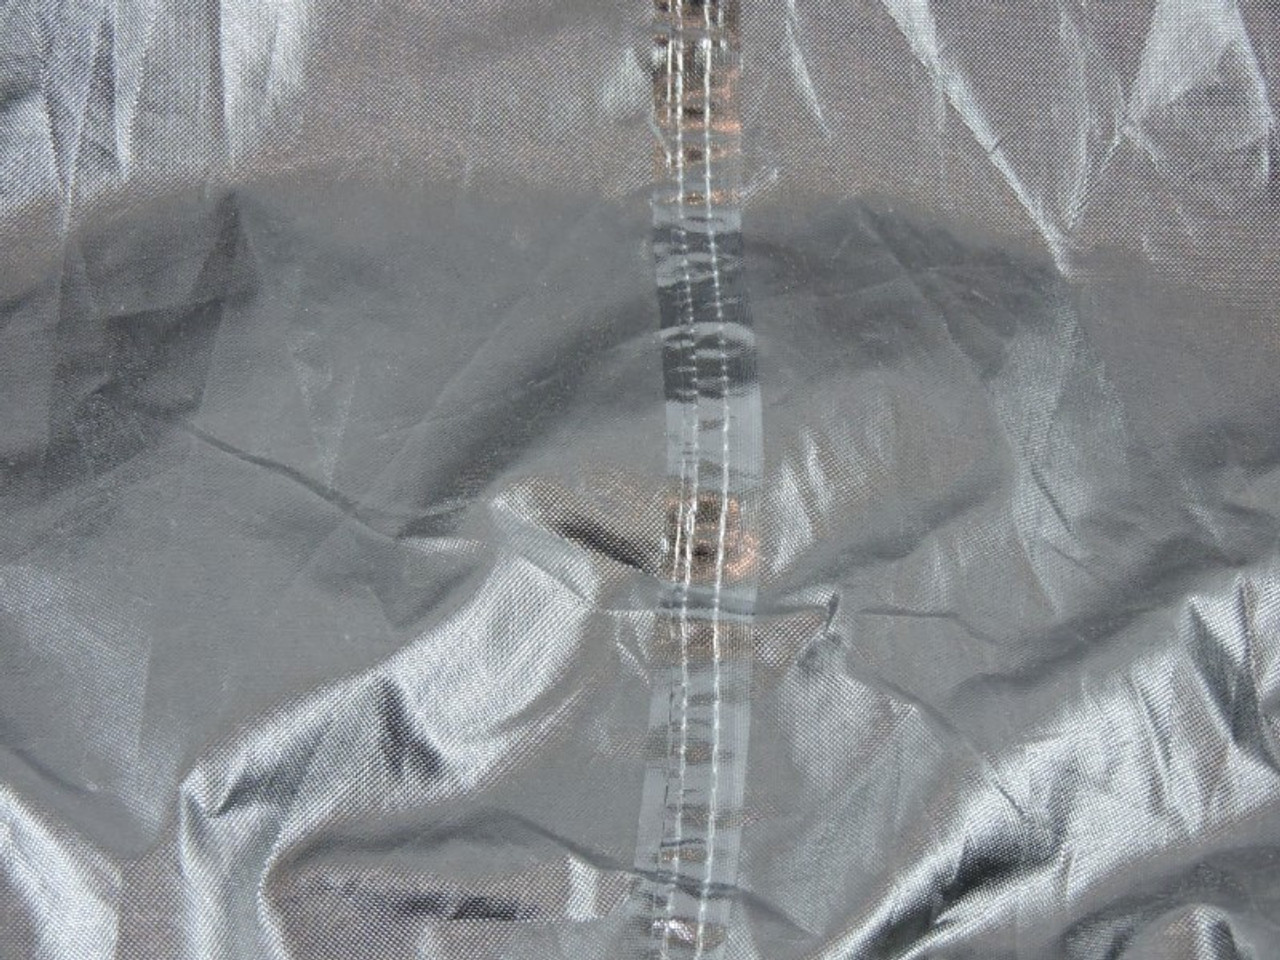 Upper fully waterproofed inner layer and taped seams extra sureness from water seepage.